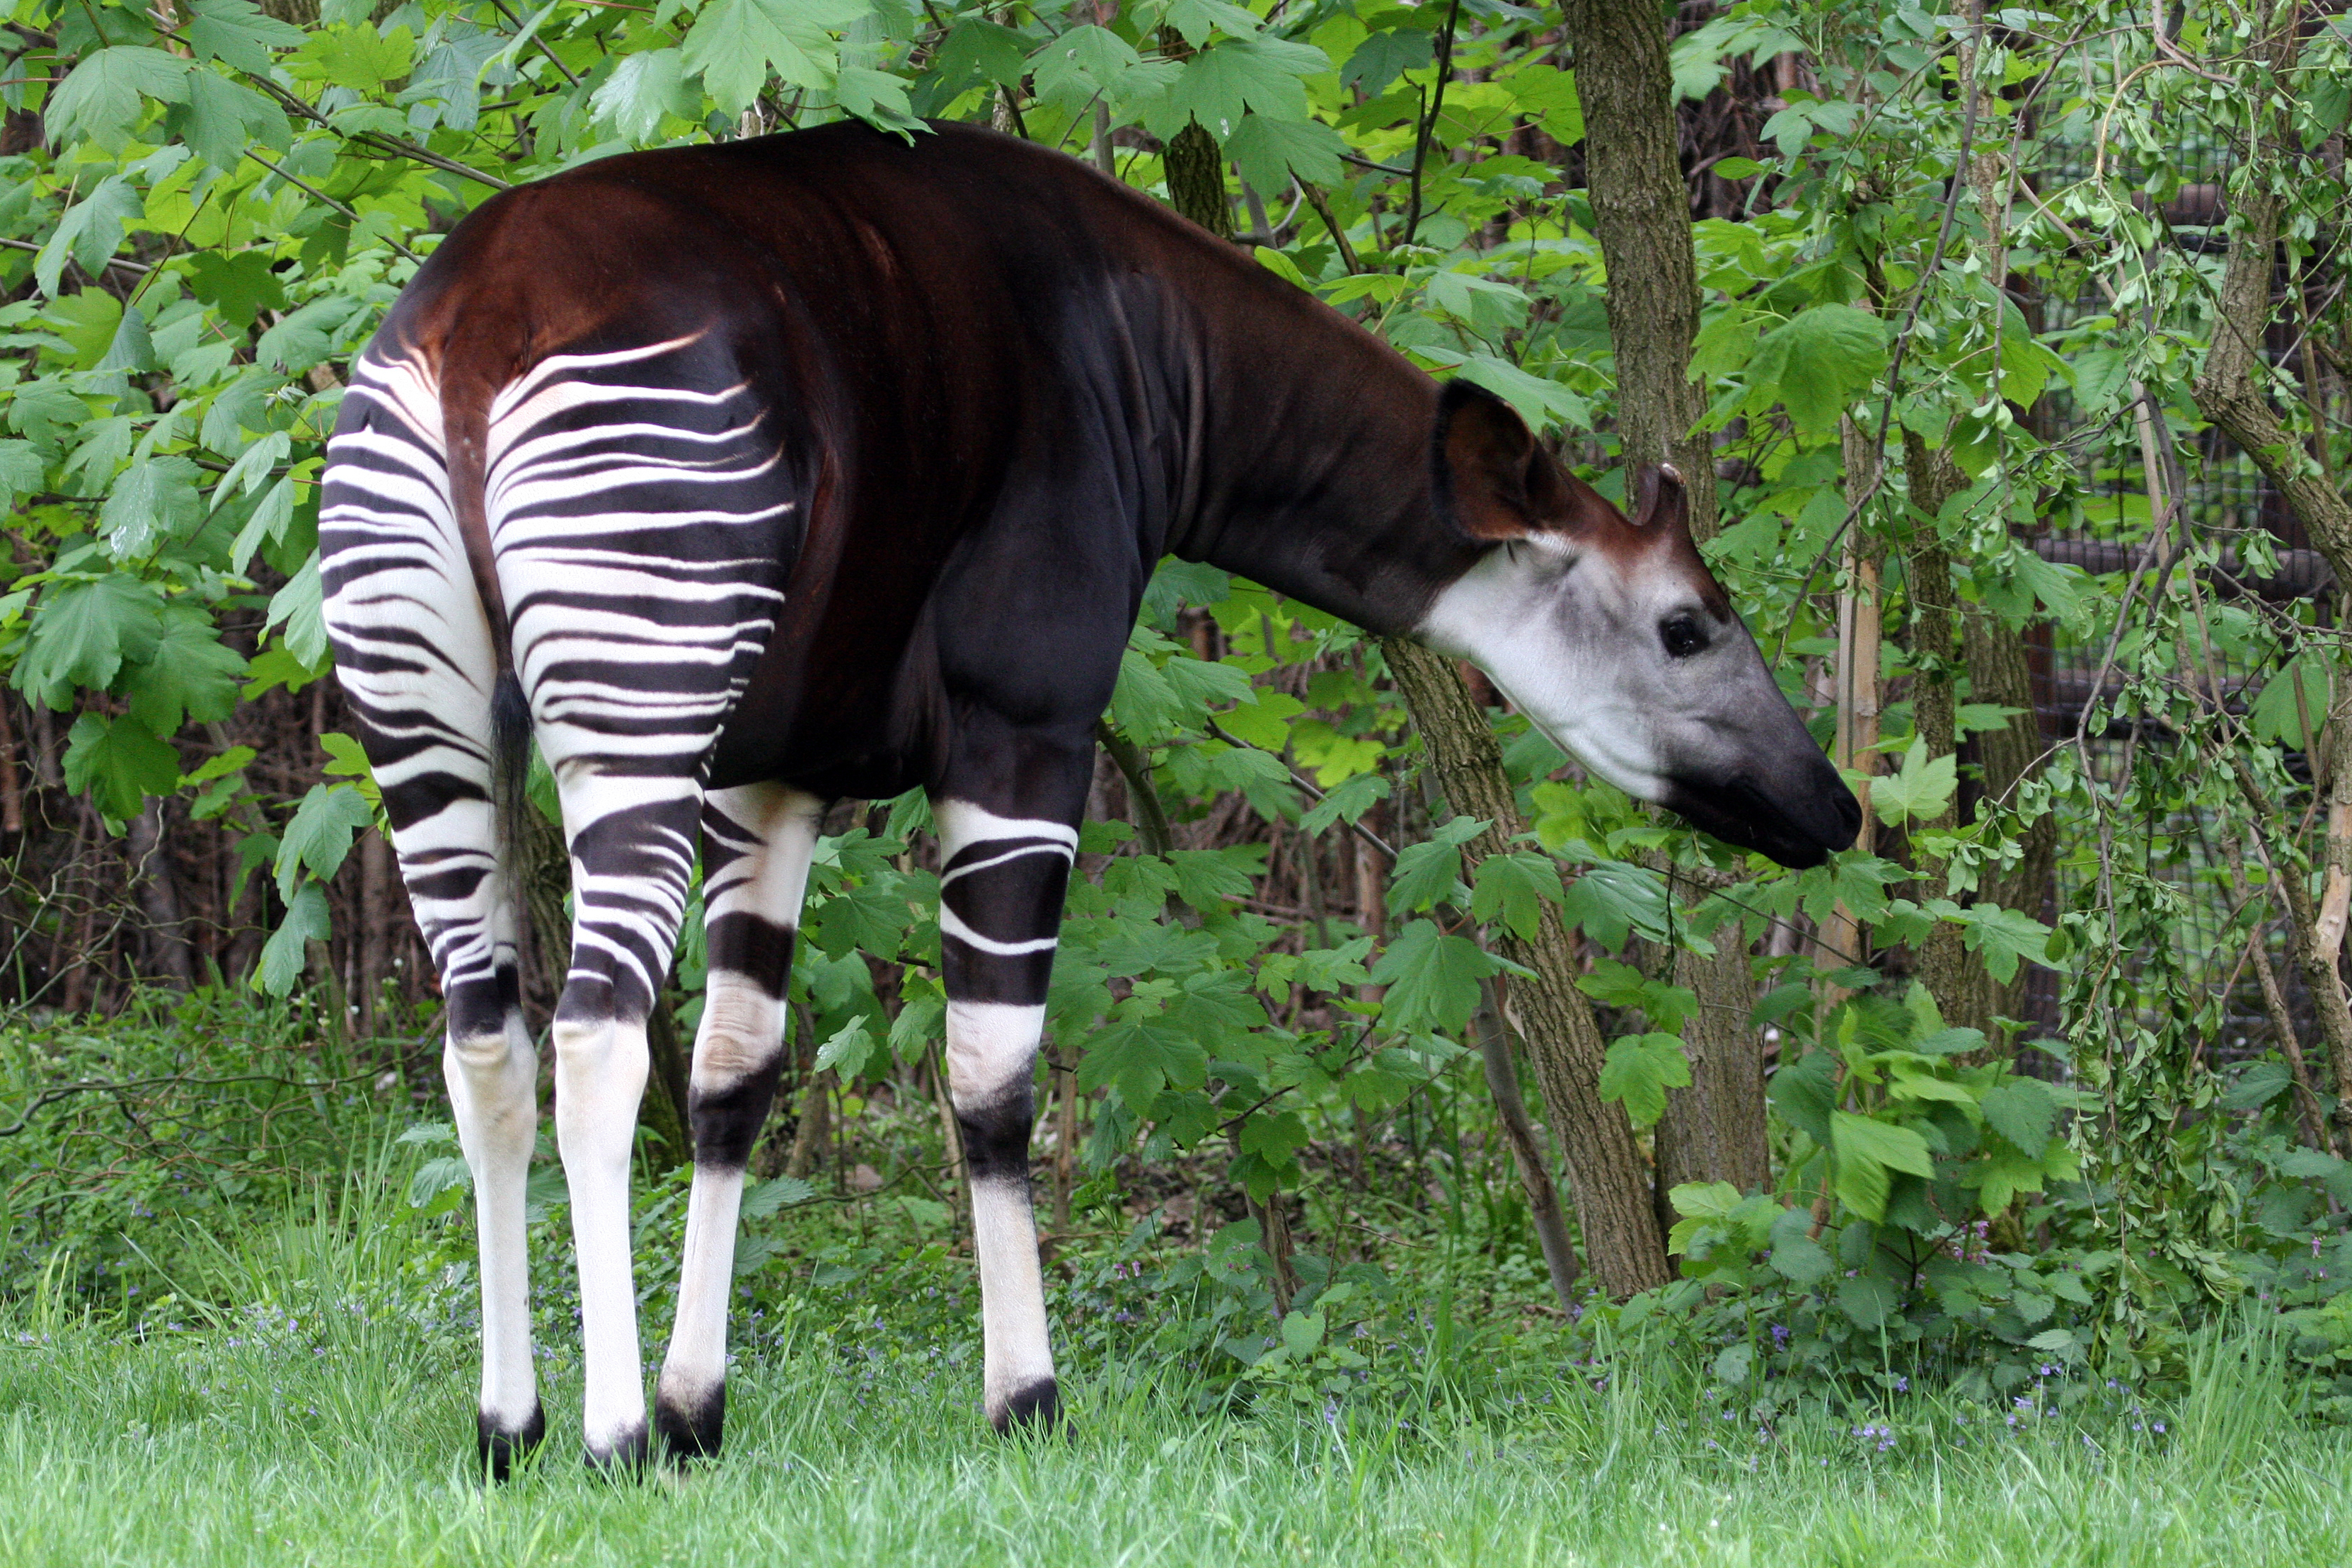 13 things you never knew you wanted to know about okapi, a.k.a. the African unicorn